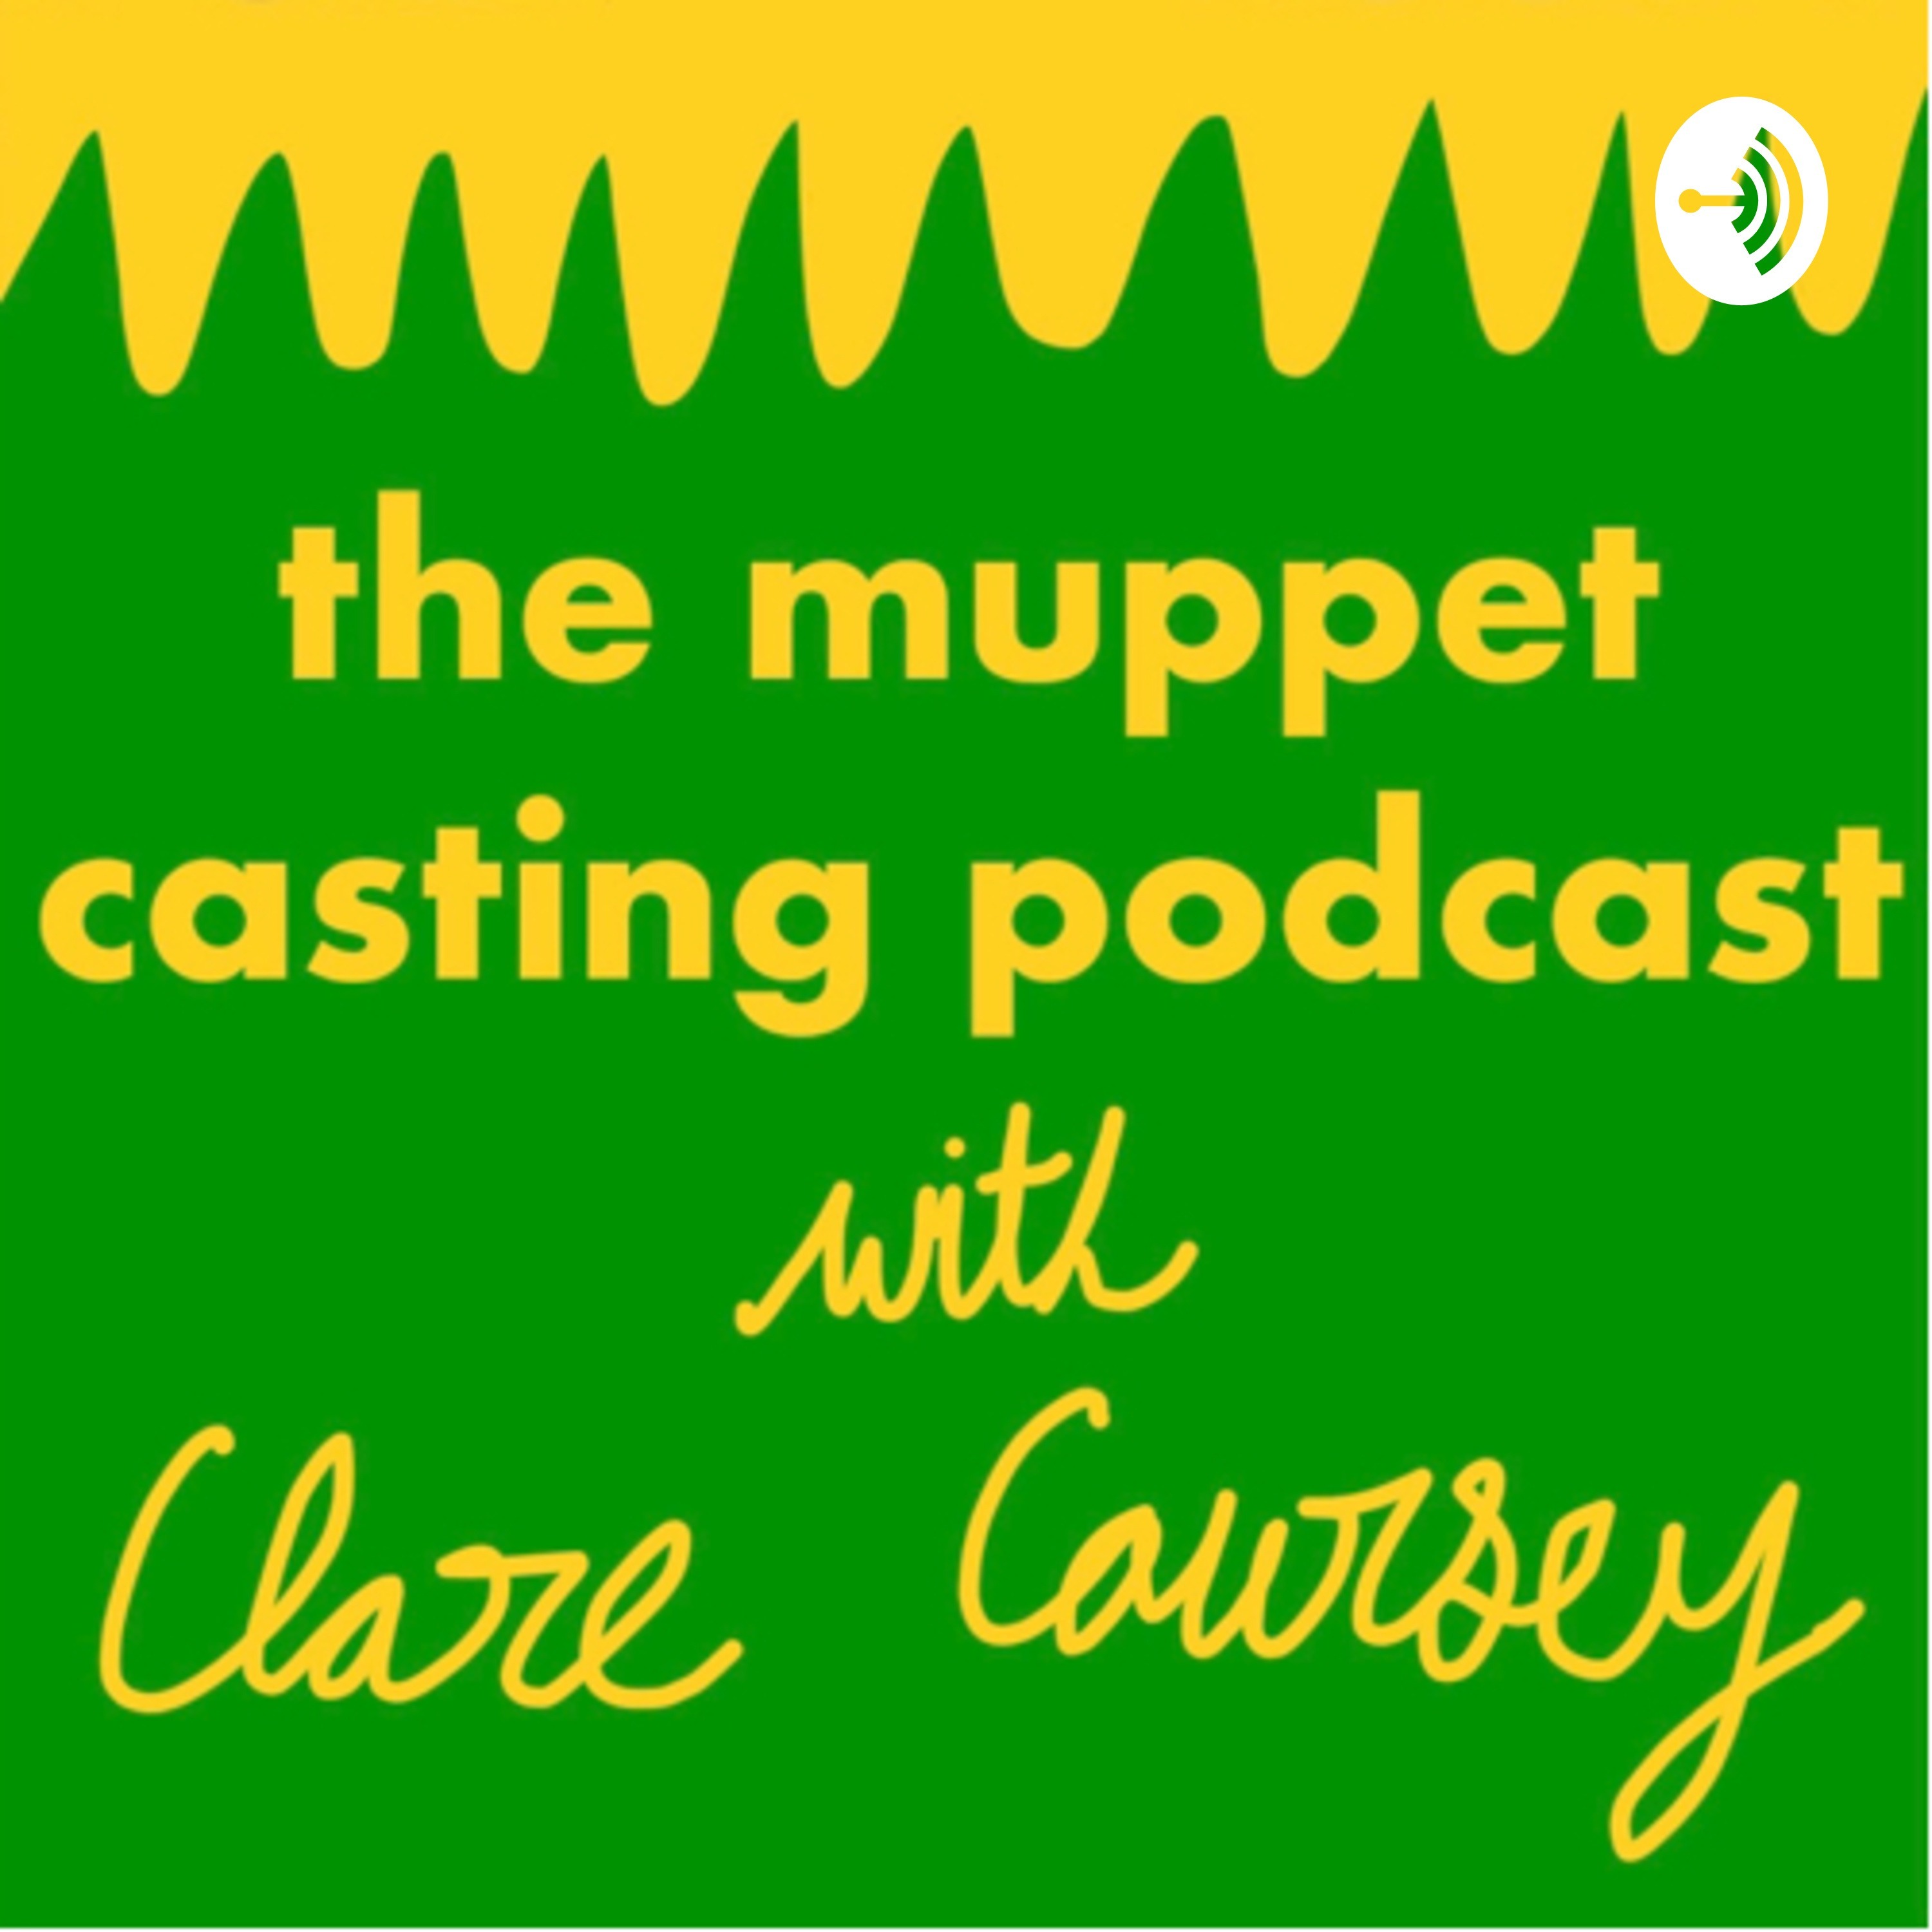 The Muppet Casting Podcast